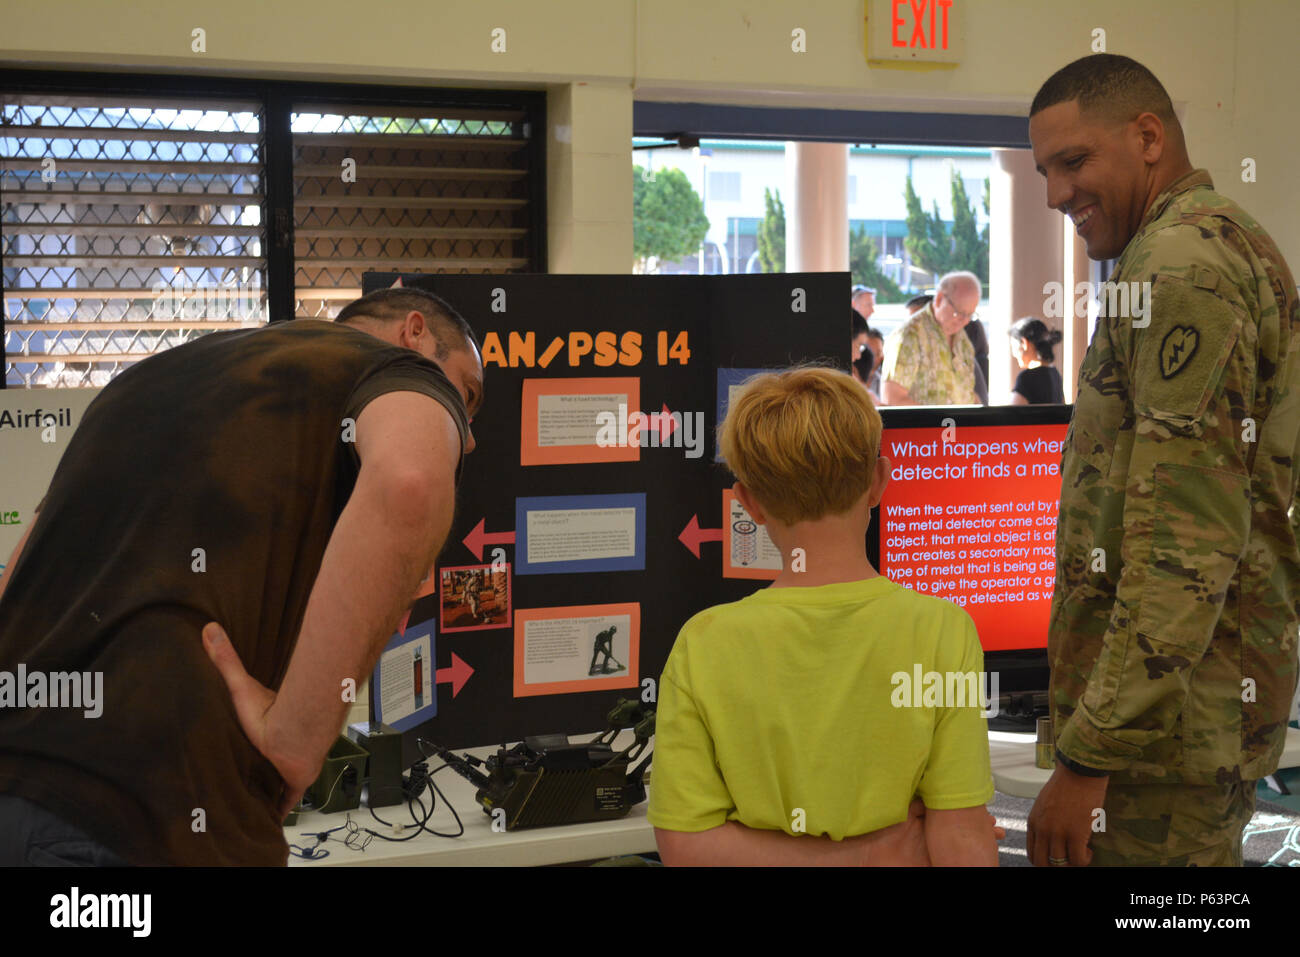 MILILANI, Hawaii – Sgt. Anthony Wallace, a combat engineer with Company A, 65th Brigade Engineer Battalion, 2nd Brigade Combat Team, 25th Infantry Division, talks with a family about the AN/PSS-14 Mine Detection System during science, technology, engineering and math education (STEM) night Apr. 9, 2016, at Mililani Middle School in Mililani, Hawaii. Events such as these improve relationships between Soldiers and the community and provides a chance for Soldiers to interact with families and students. (U.S. Army photo by Staff Sgt. Carlos Davis, 2nd Stryker Brigade Combat Team, 25th Infantry Div Stock Photo